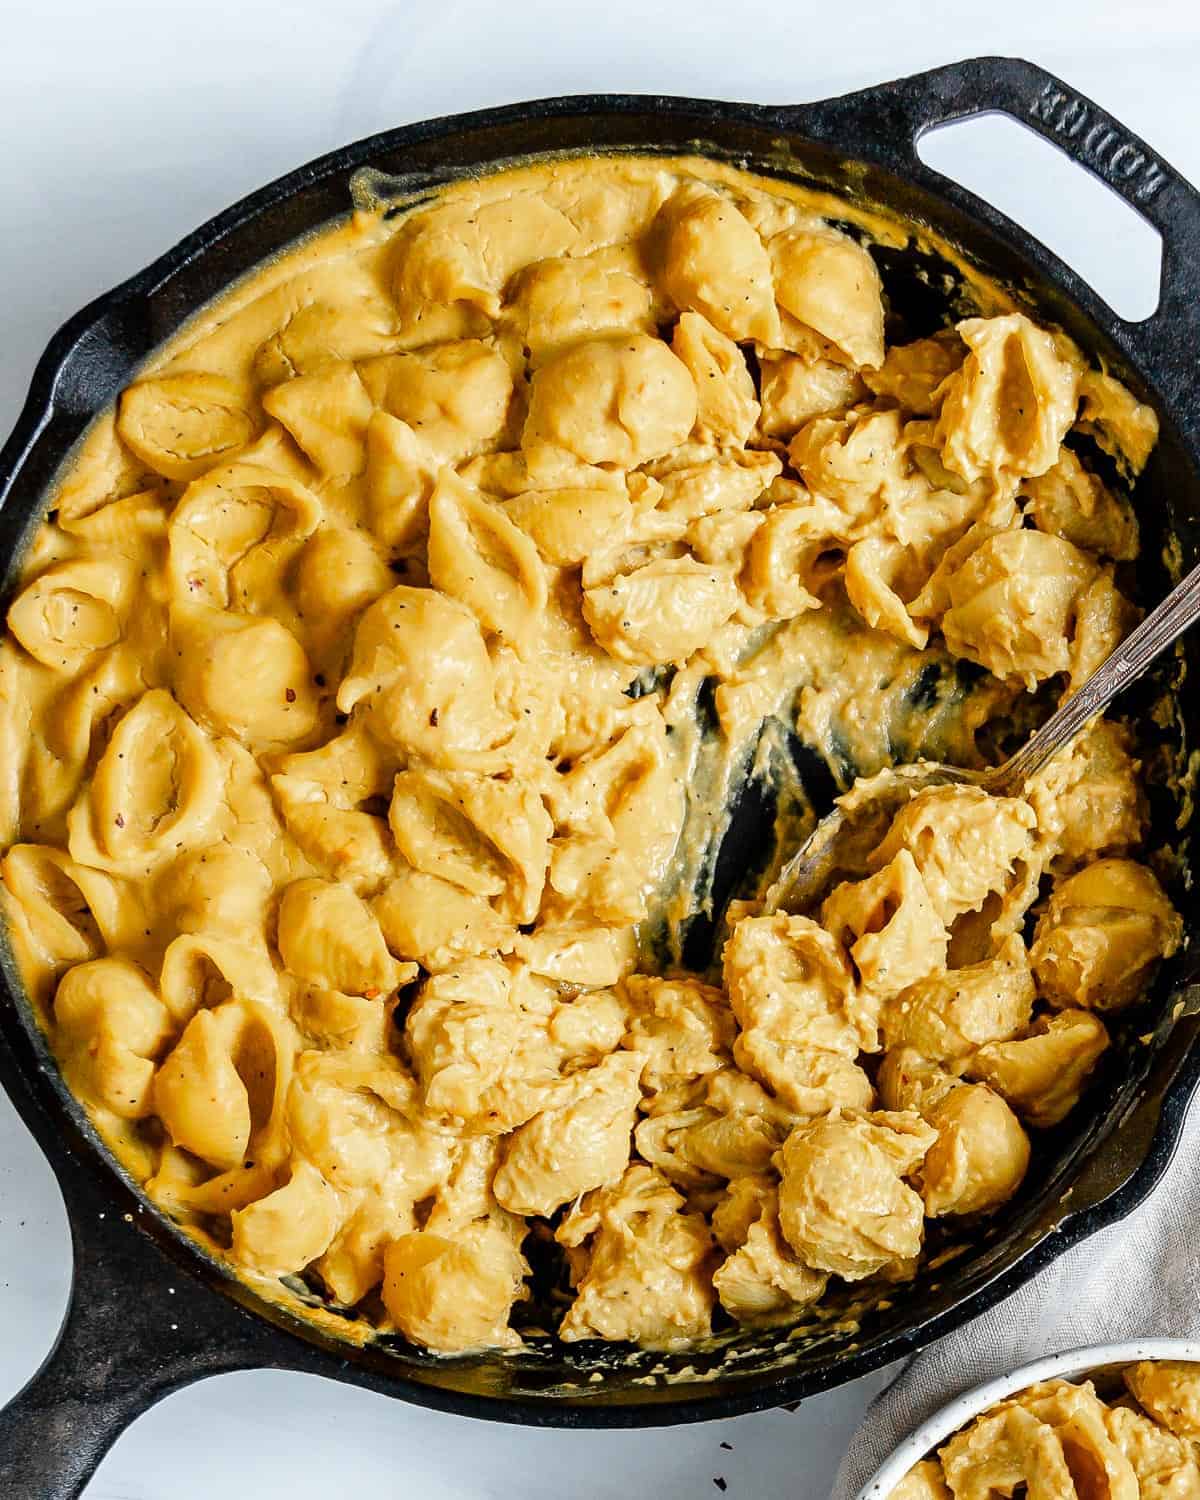 completed Butternut Squash Mac n’ Cheese in a skillet against a white background